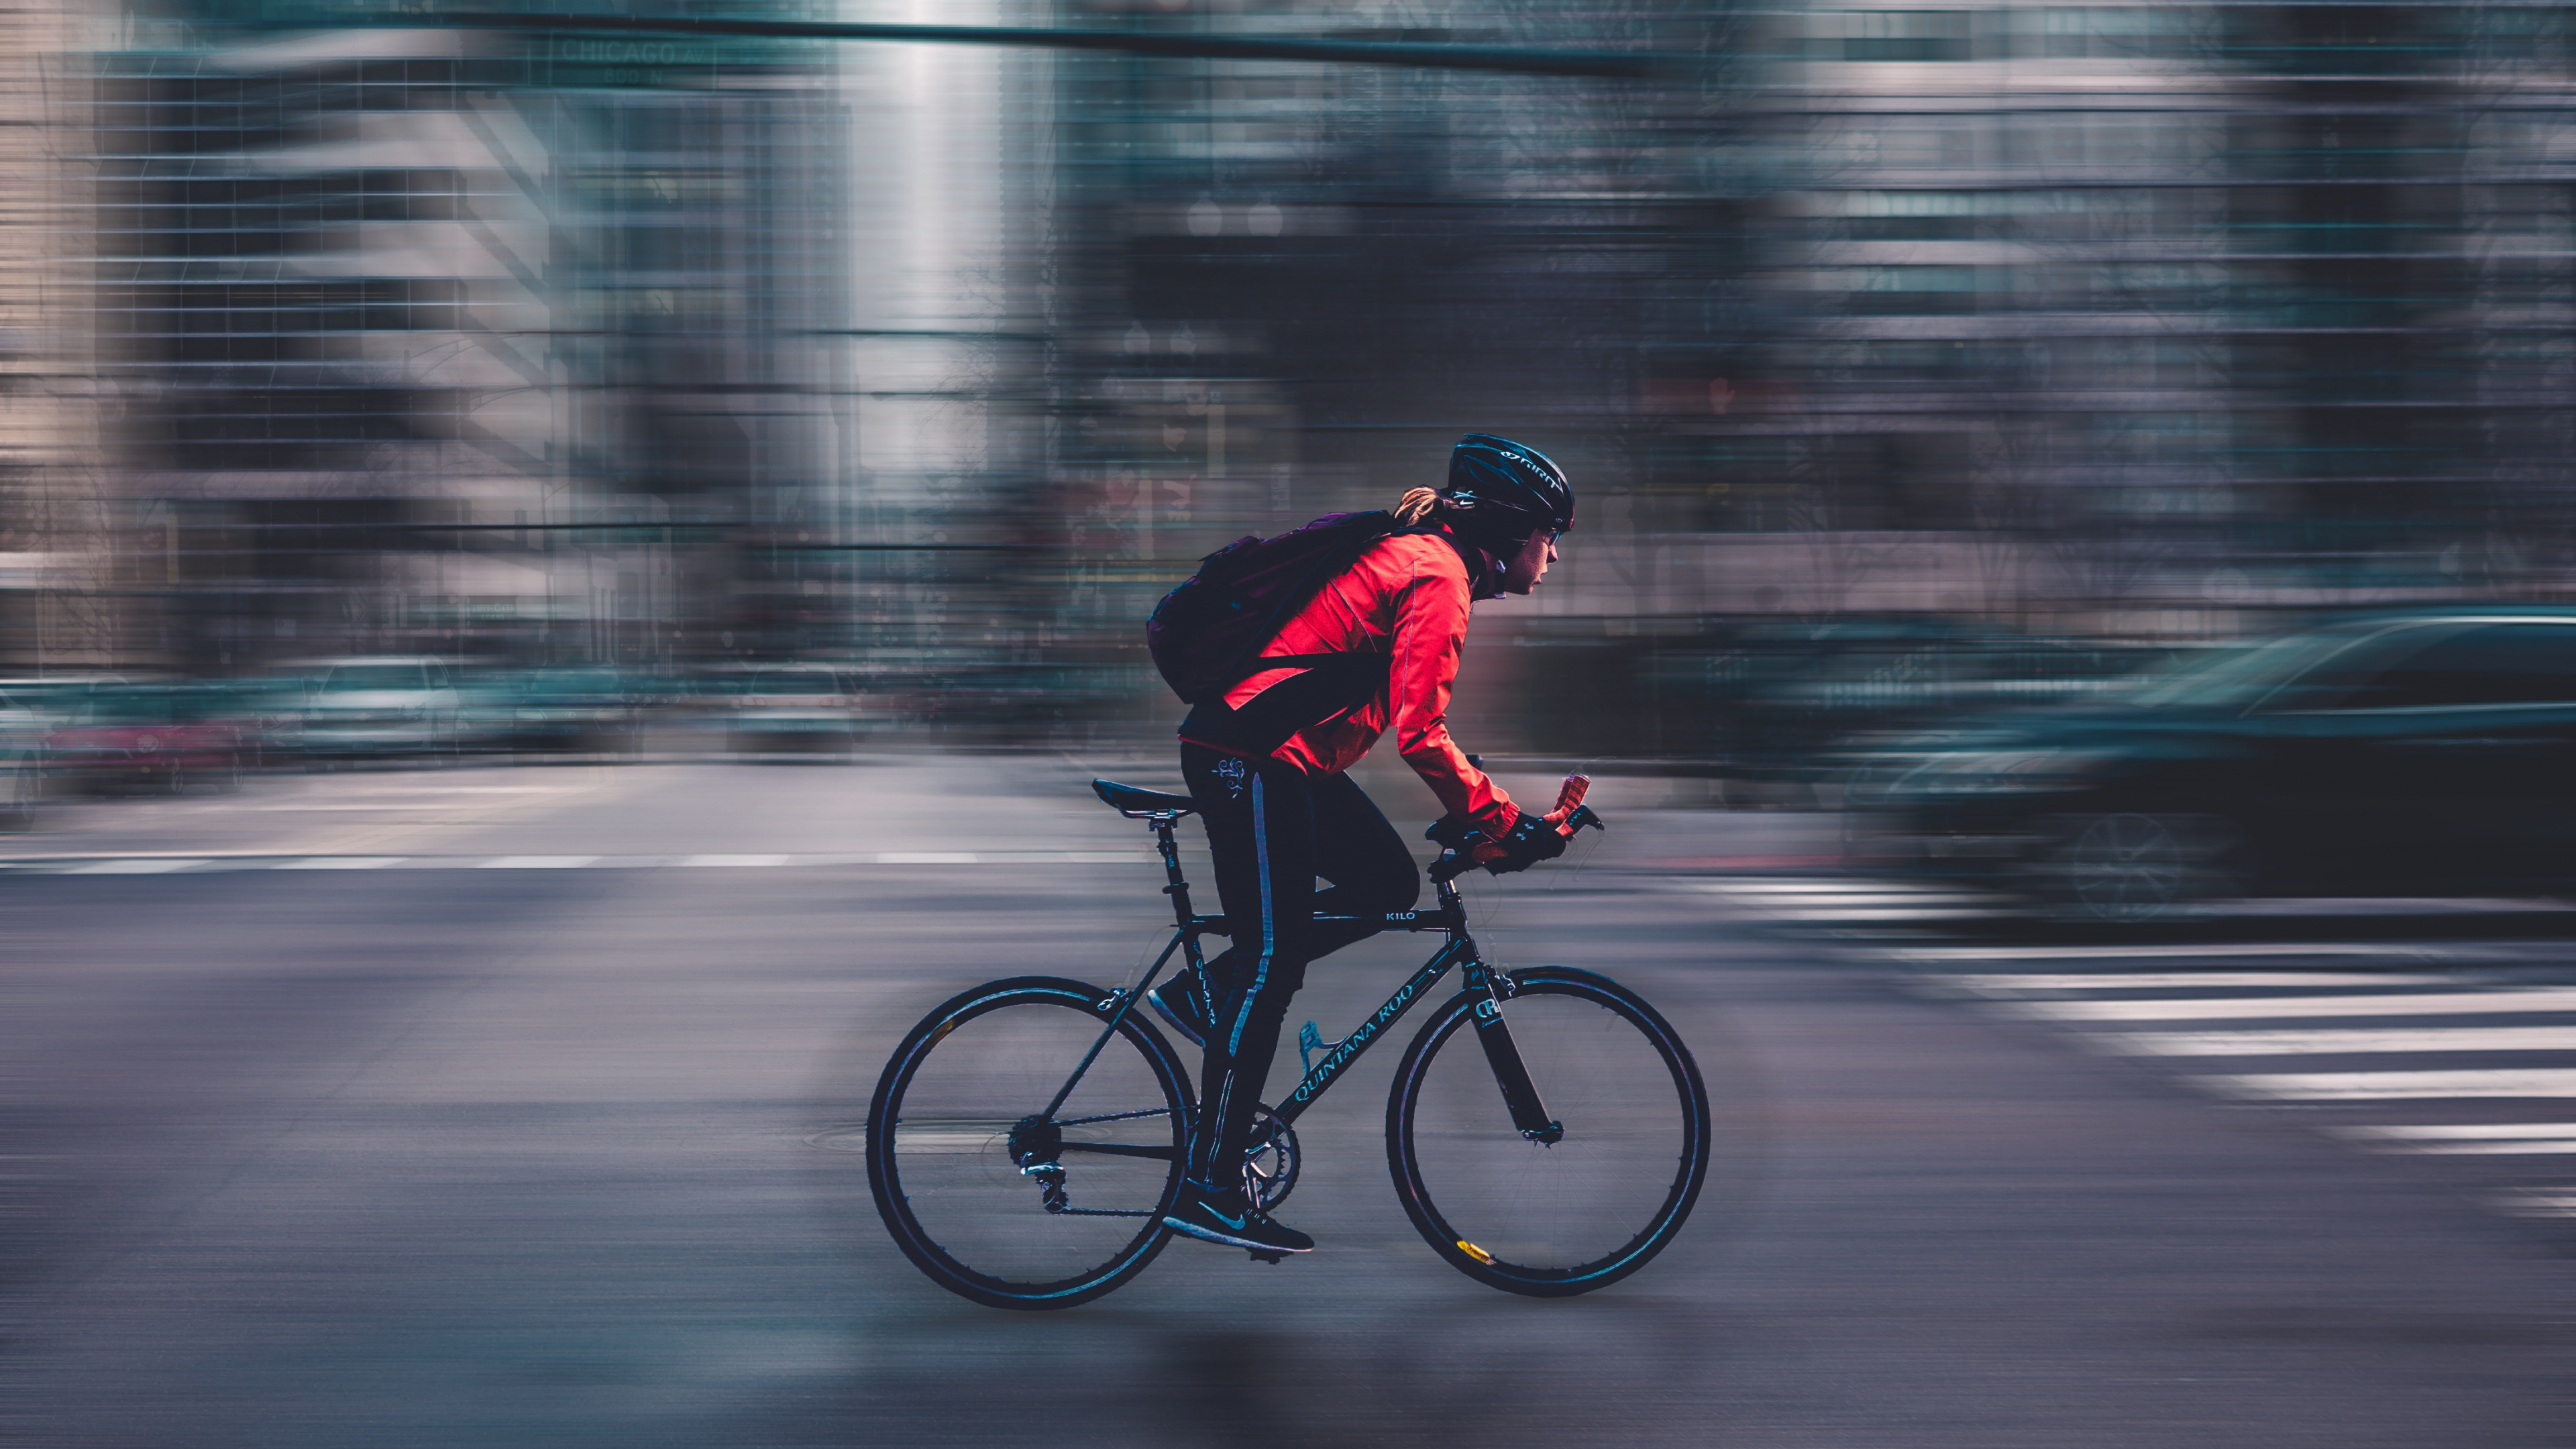 Man in Red Jacket Riding Bicycle on Road During Daytime. Wallpaper in 3840x2160 Resolution